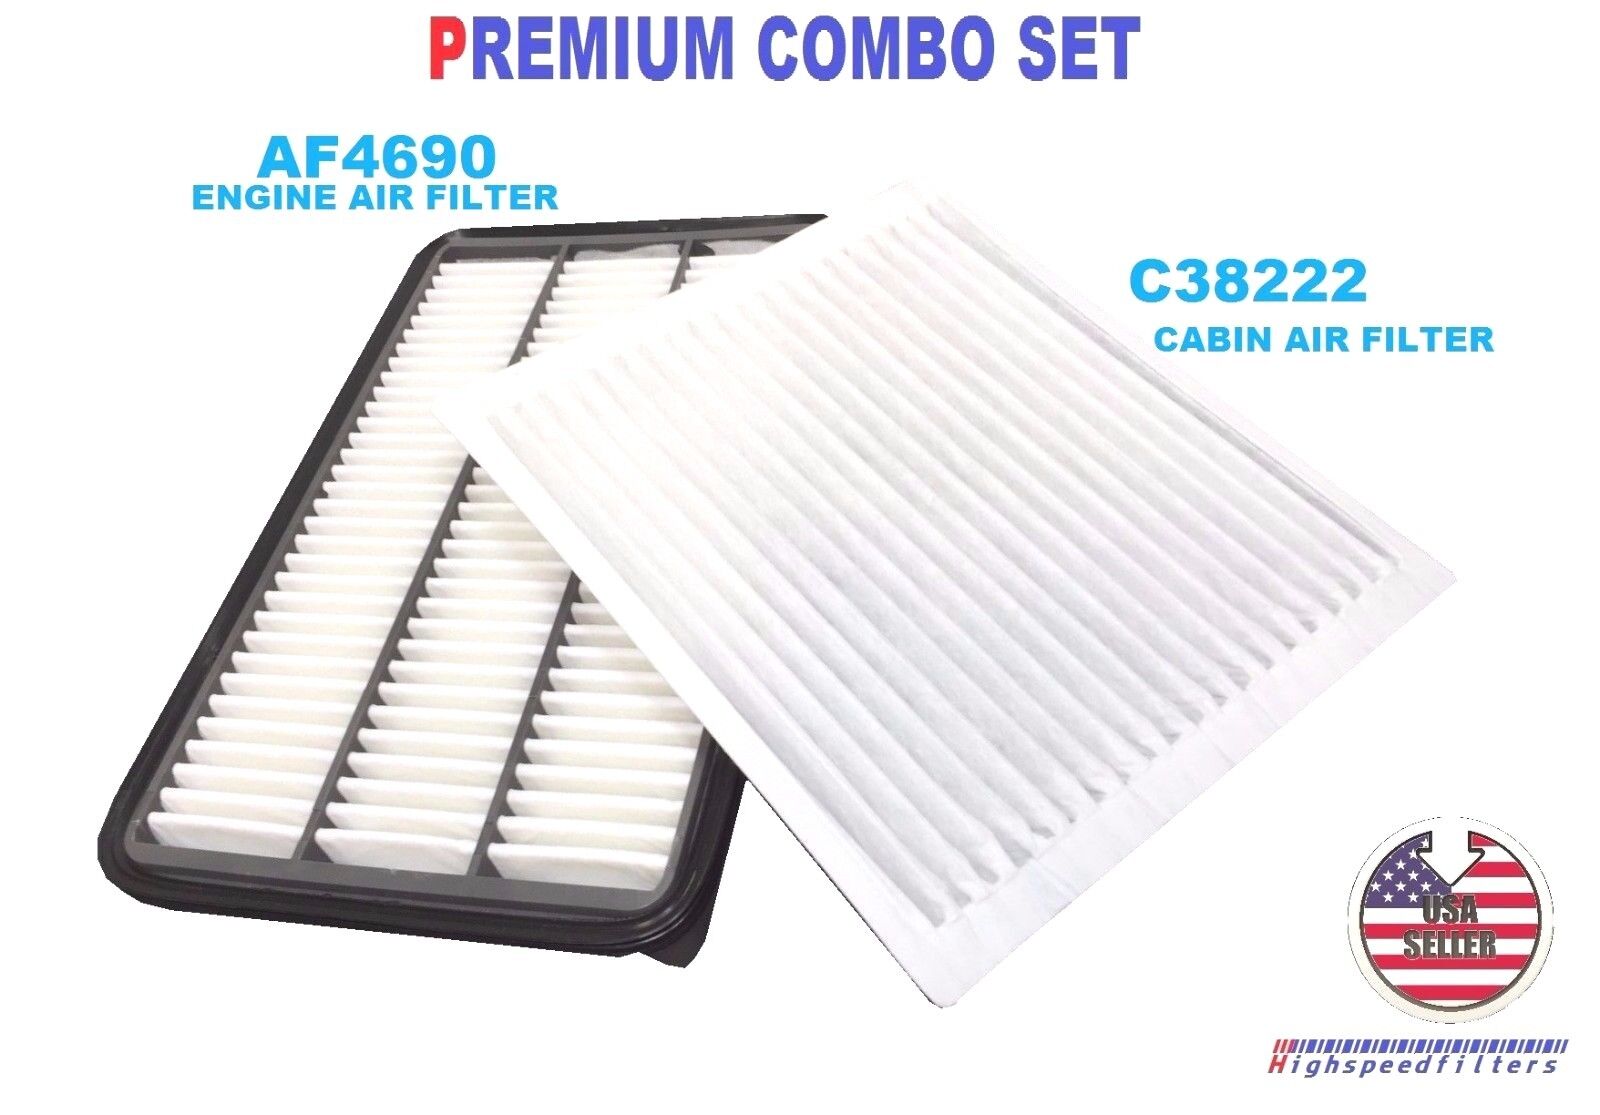 AF4690 C38222 COMBO Air Filter & Cabin Air Filter For 1999 - 2003 LEXUS RX300